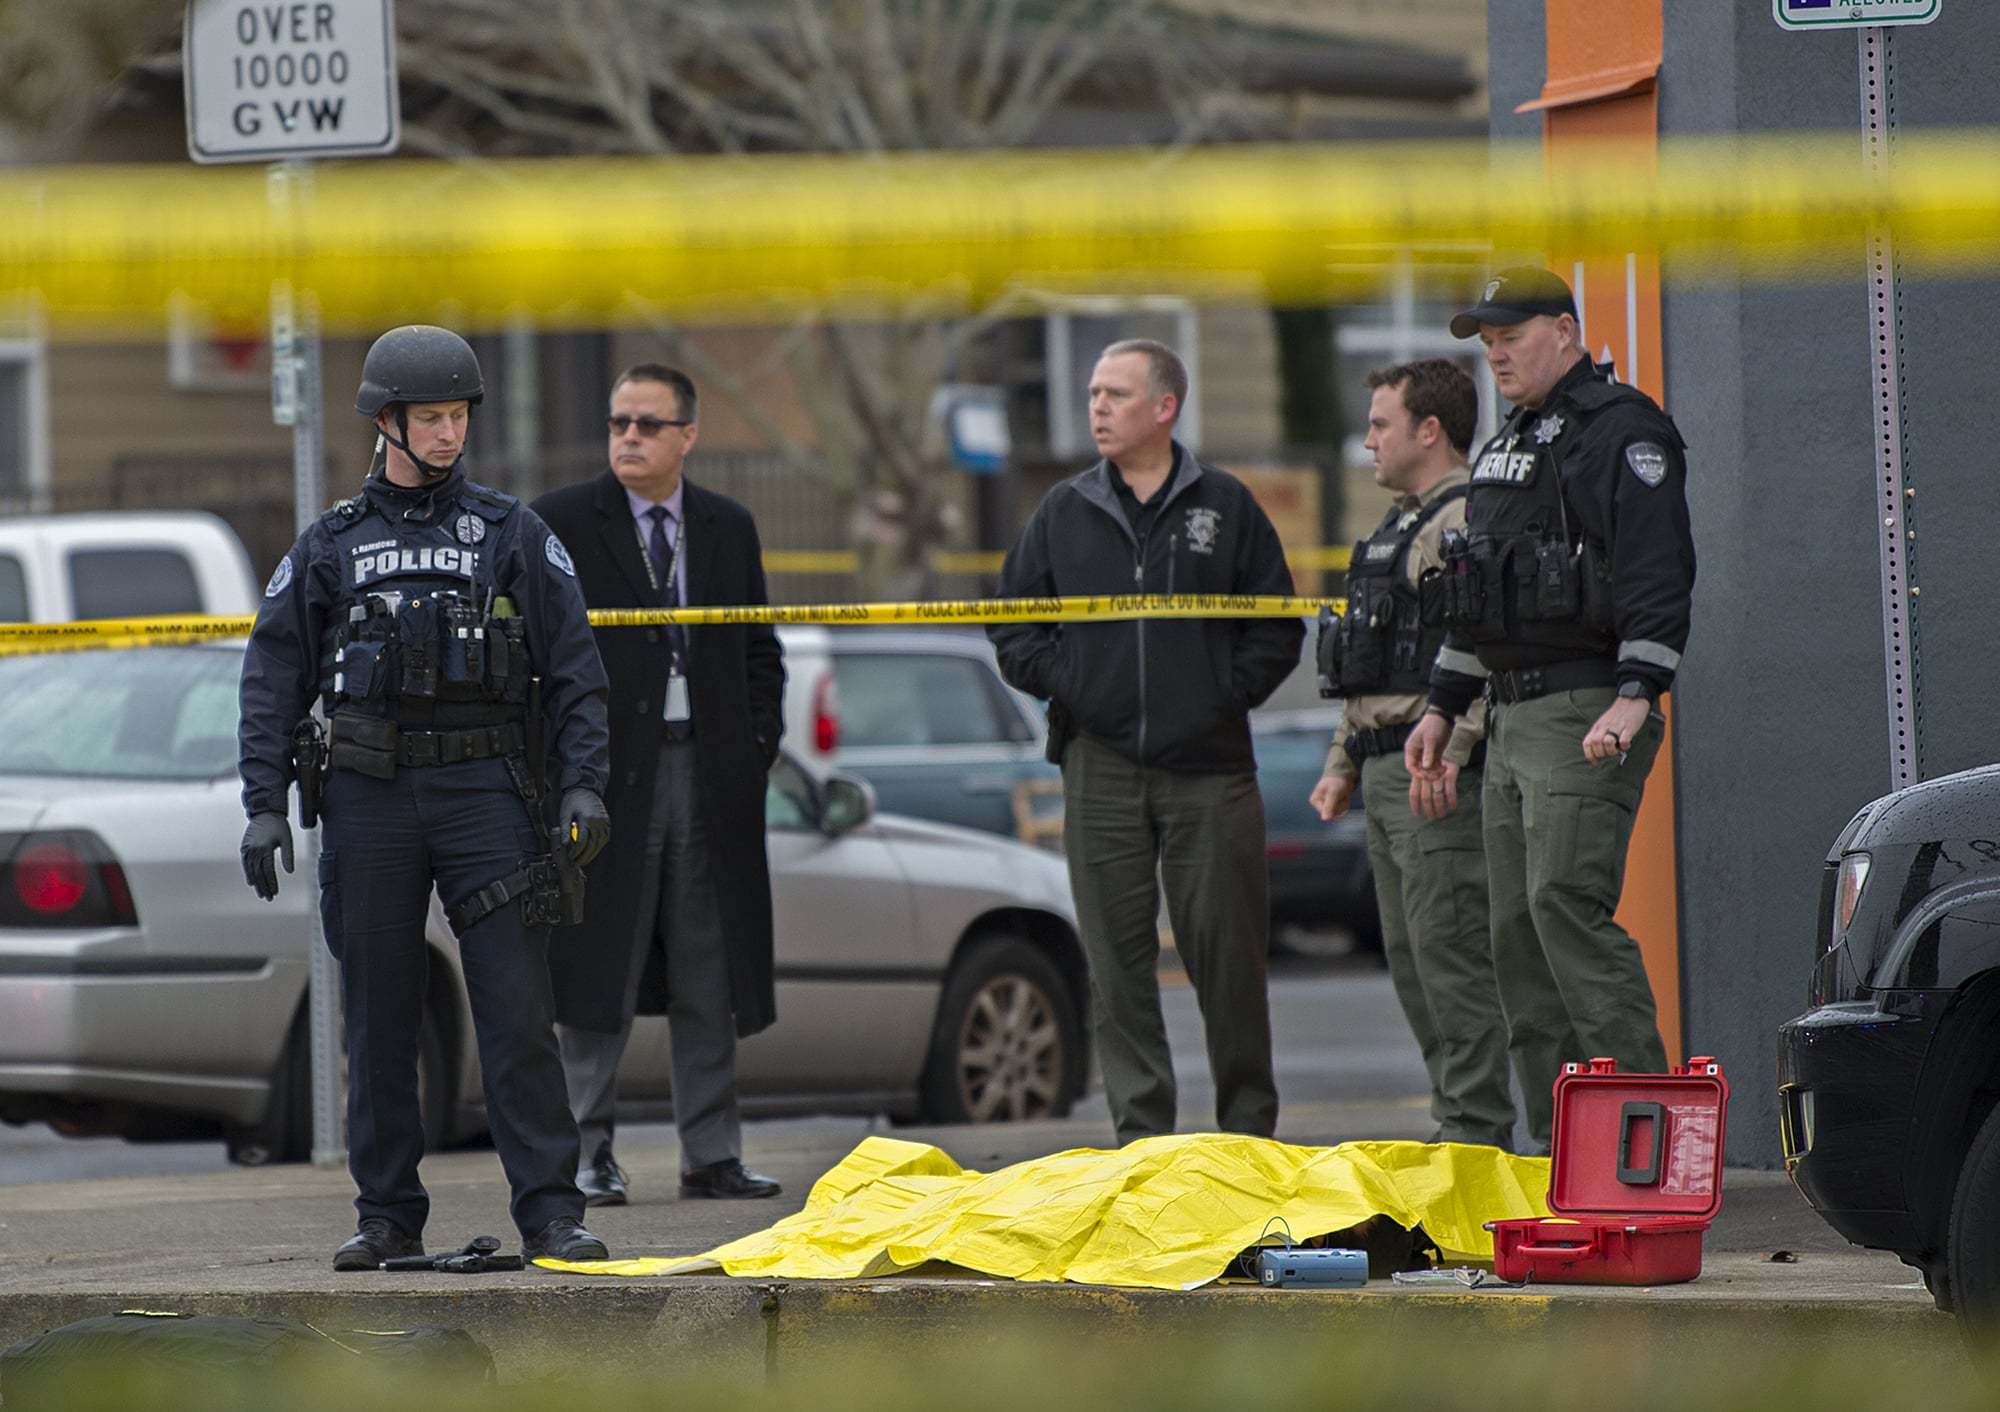 Vancouver police and Clark County Sheriff's deputies stand at the scene of a fatal officer-involved shooting at the corner of West 12th Street and Jefferson Street in downtown Vancouver on Thursday afternoon. The officer at the left appears to be standing over two firearms.